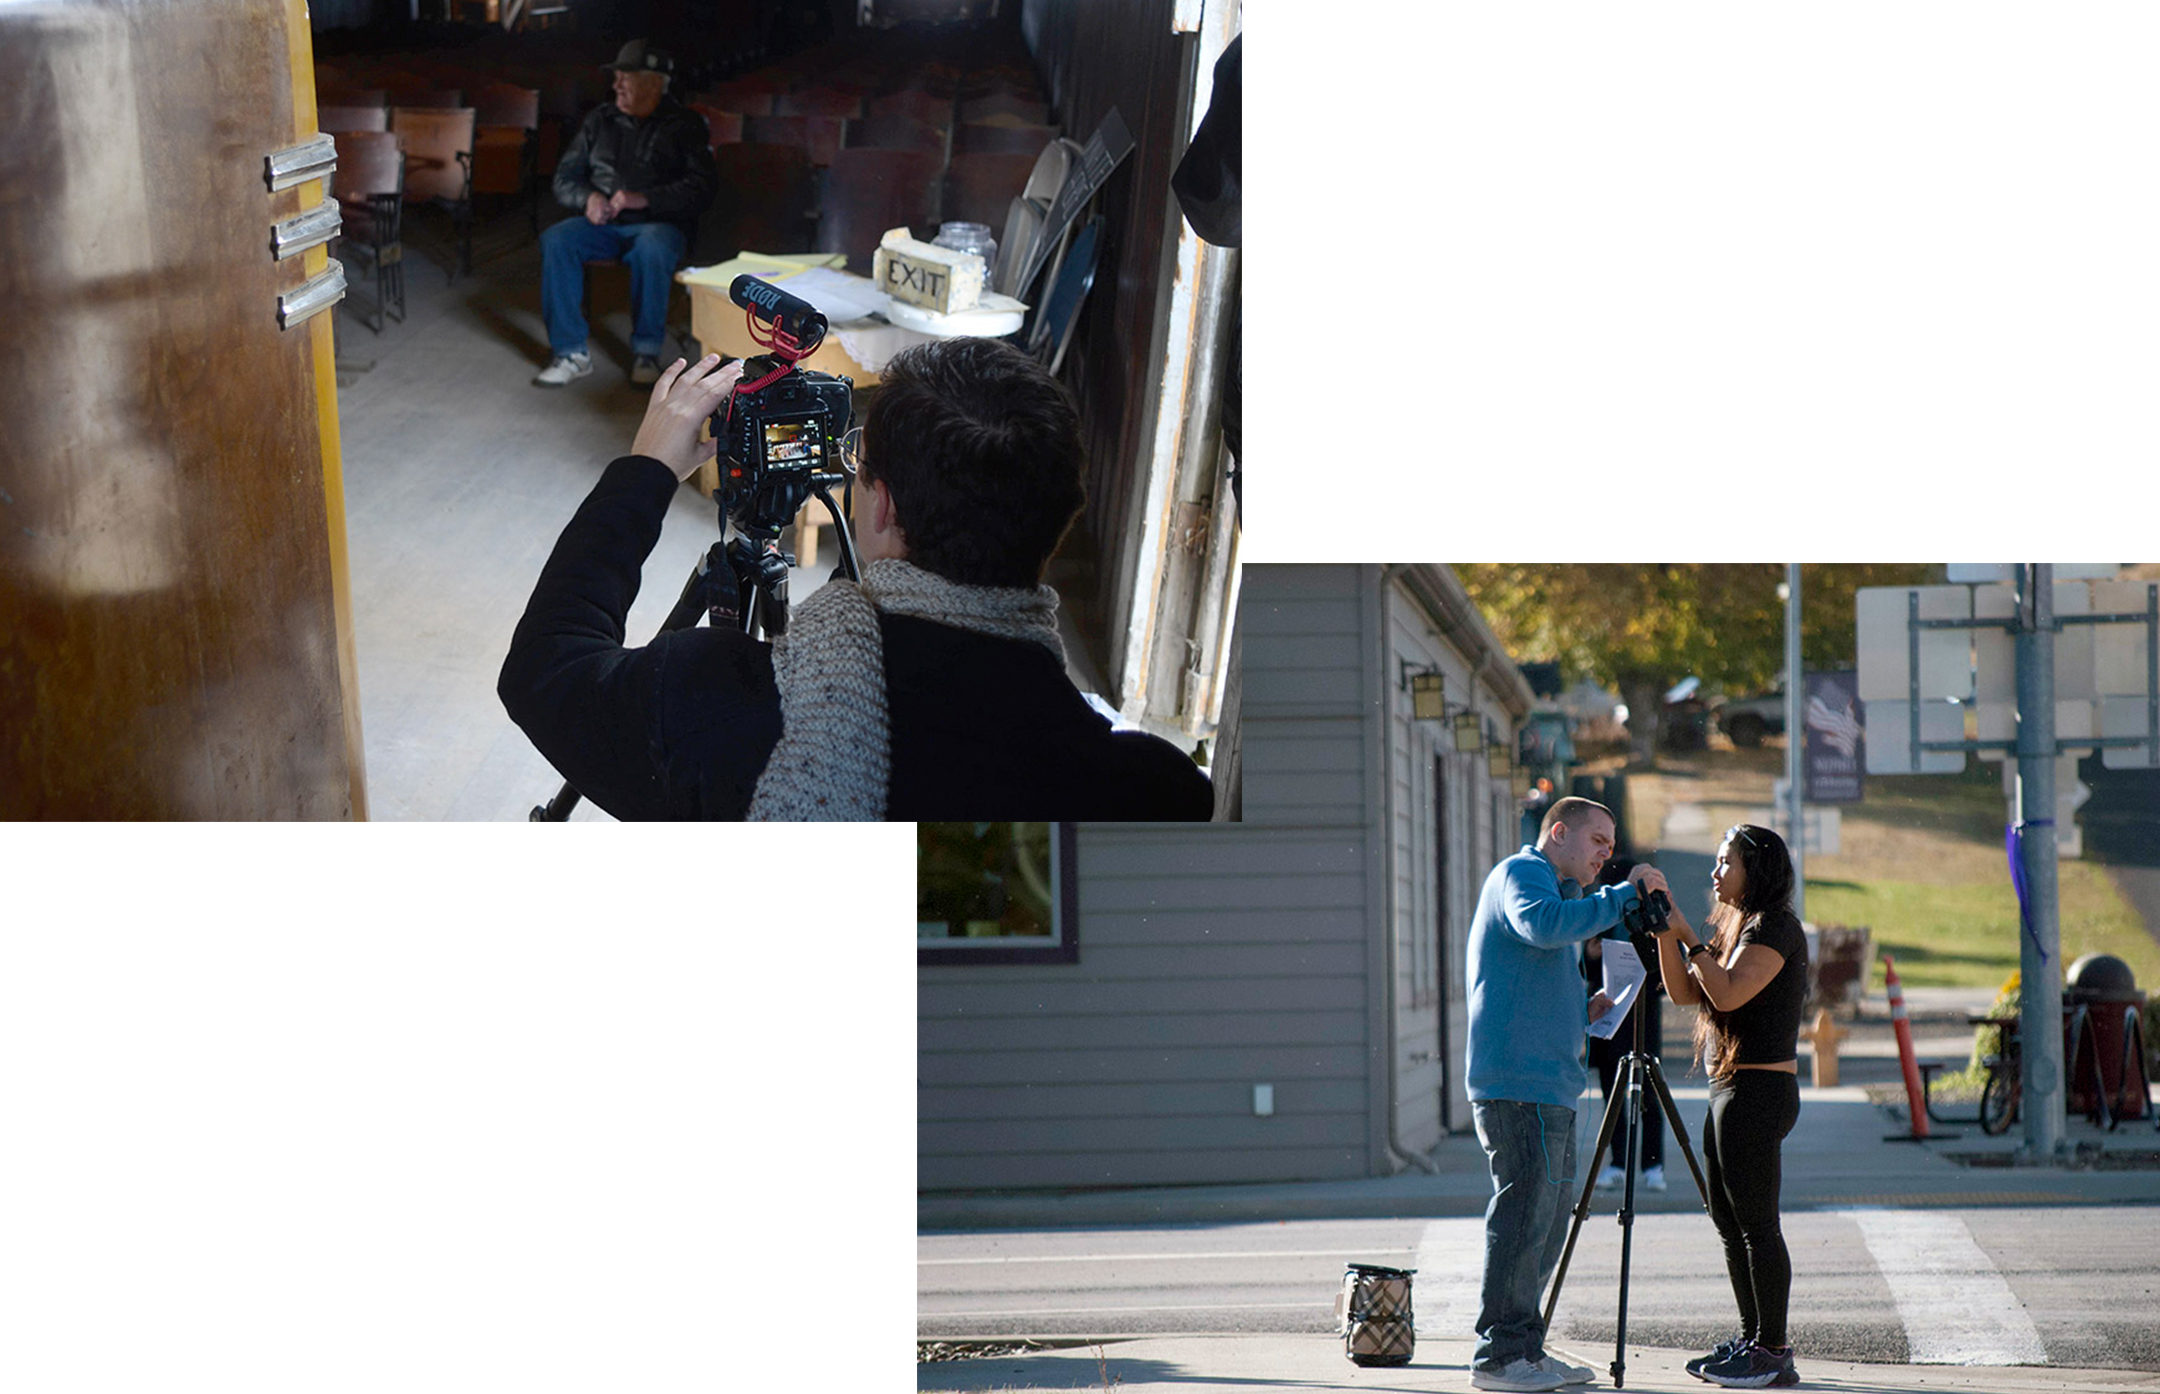 Two photos, one of a young man shooting video of an older man inside a dark theater, the other of two student journalists setting up a camera on a street